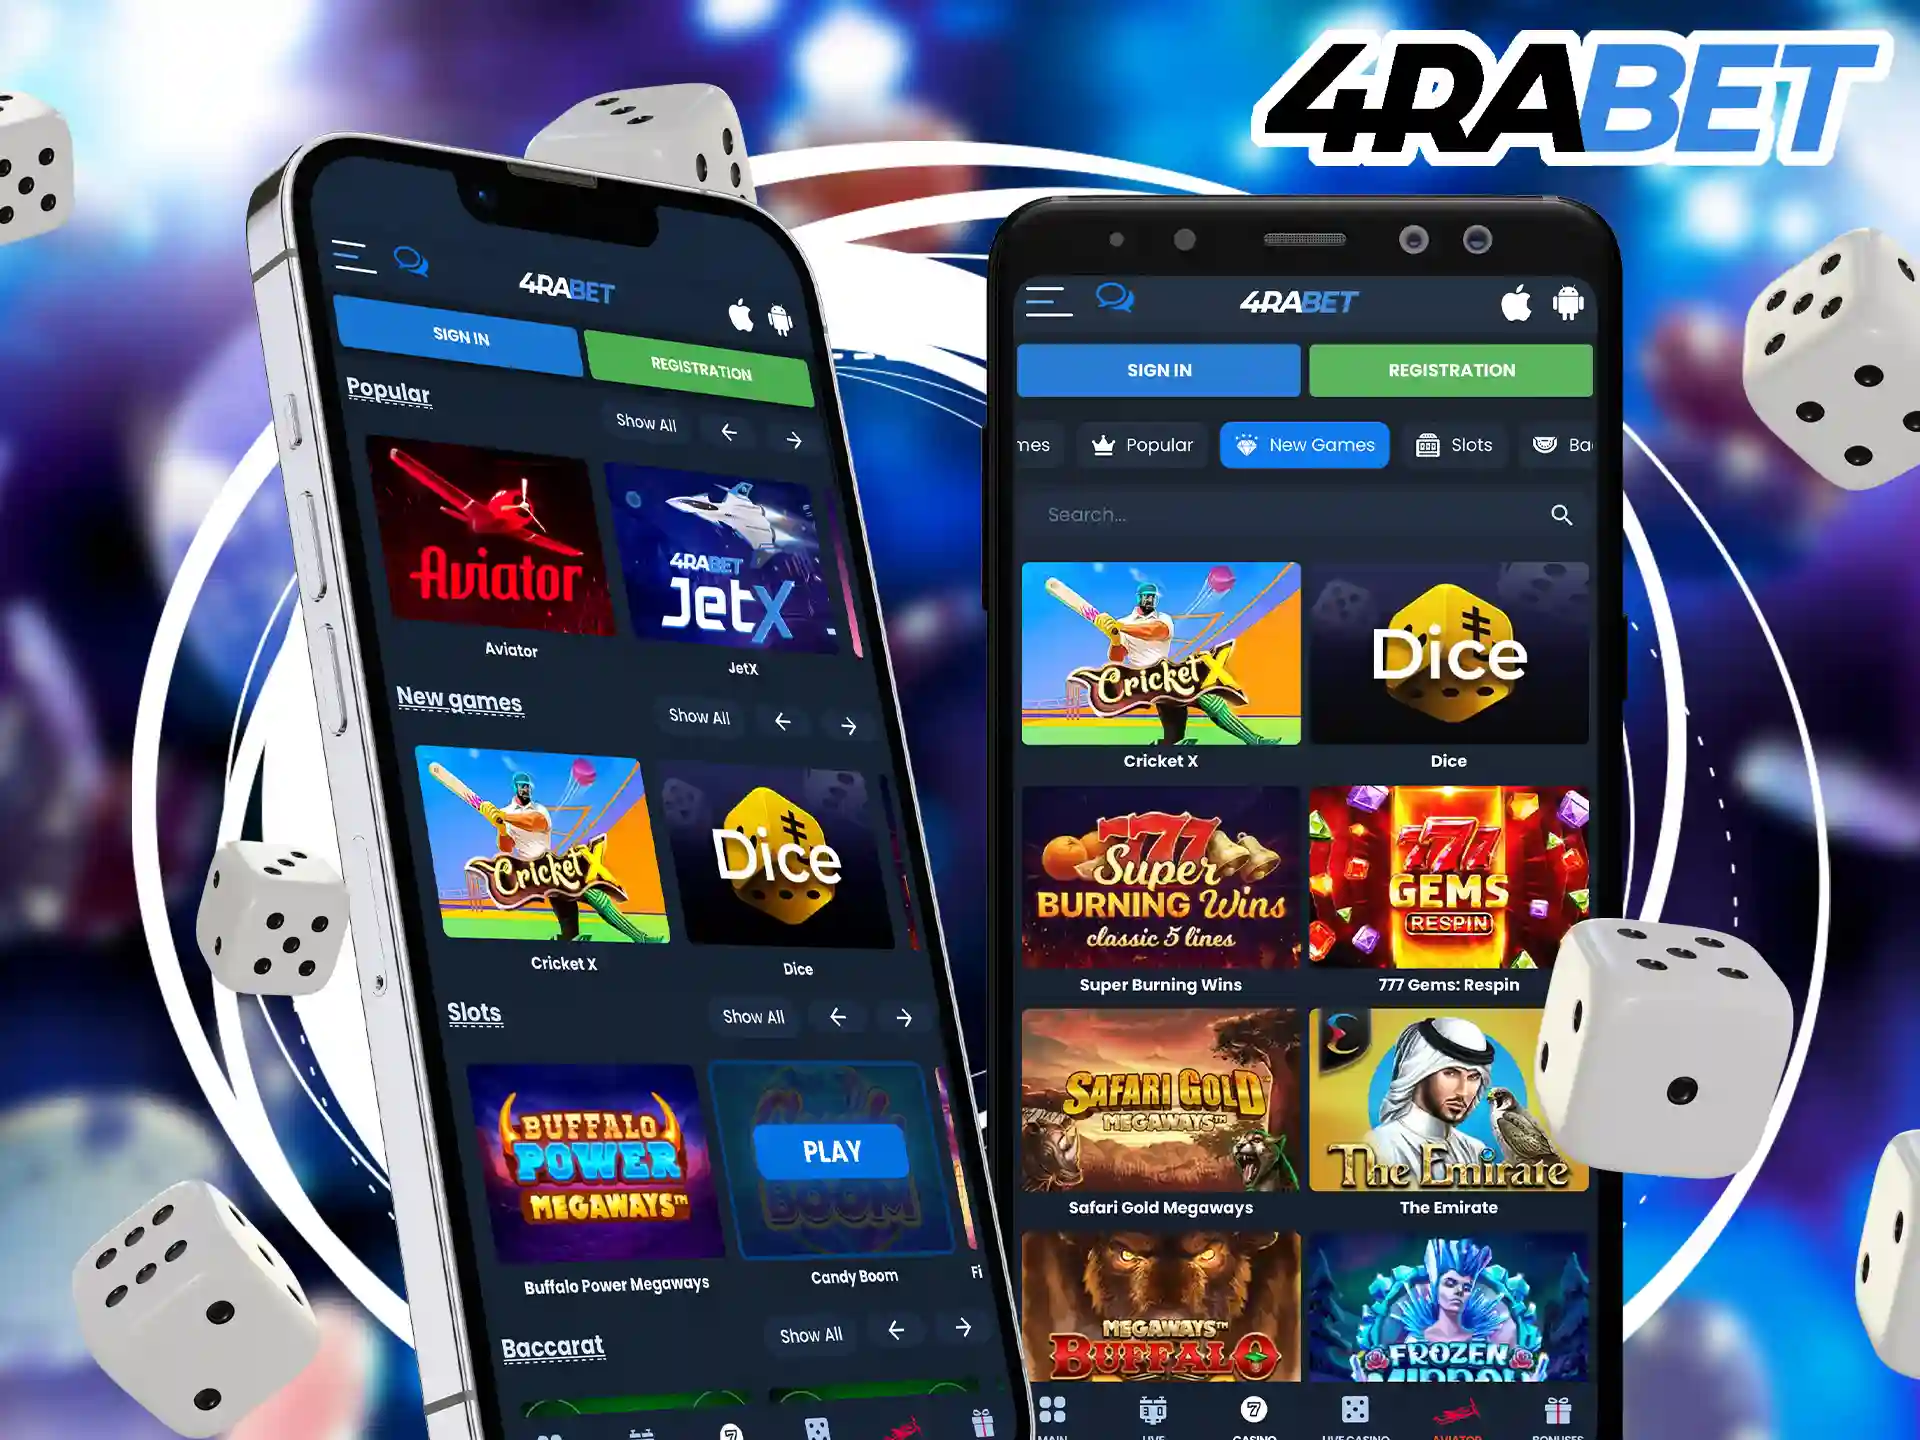 Play the best casino games, install the app from 4rabet on your smartphone.